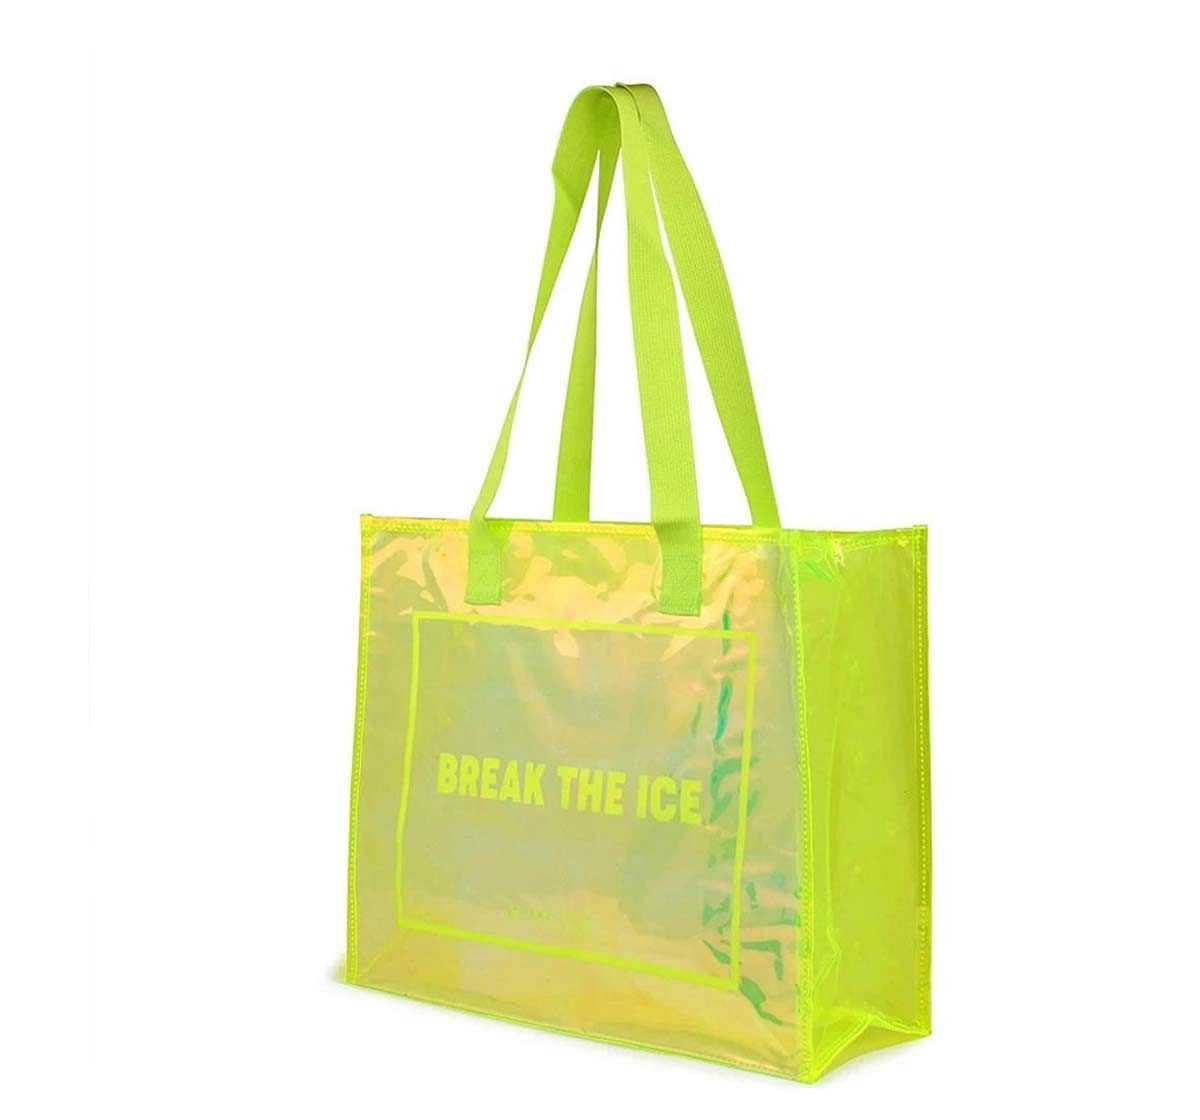 Hamster London Tote Bag Green Travel for Kids Age 3Y+ (Green)